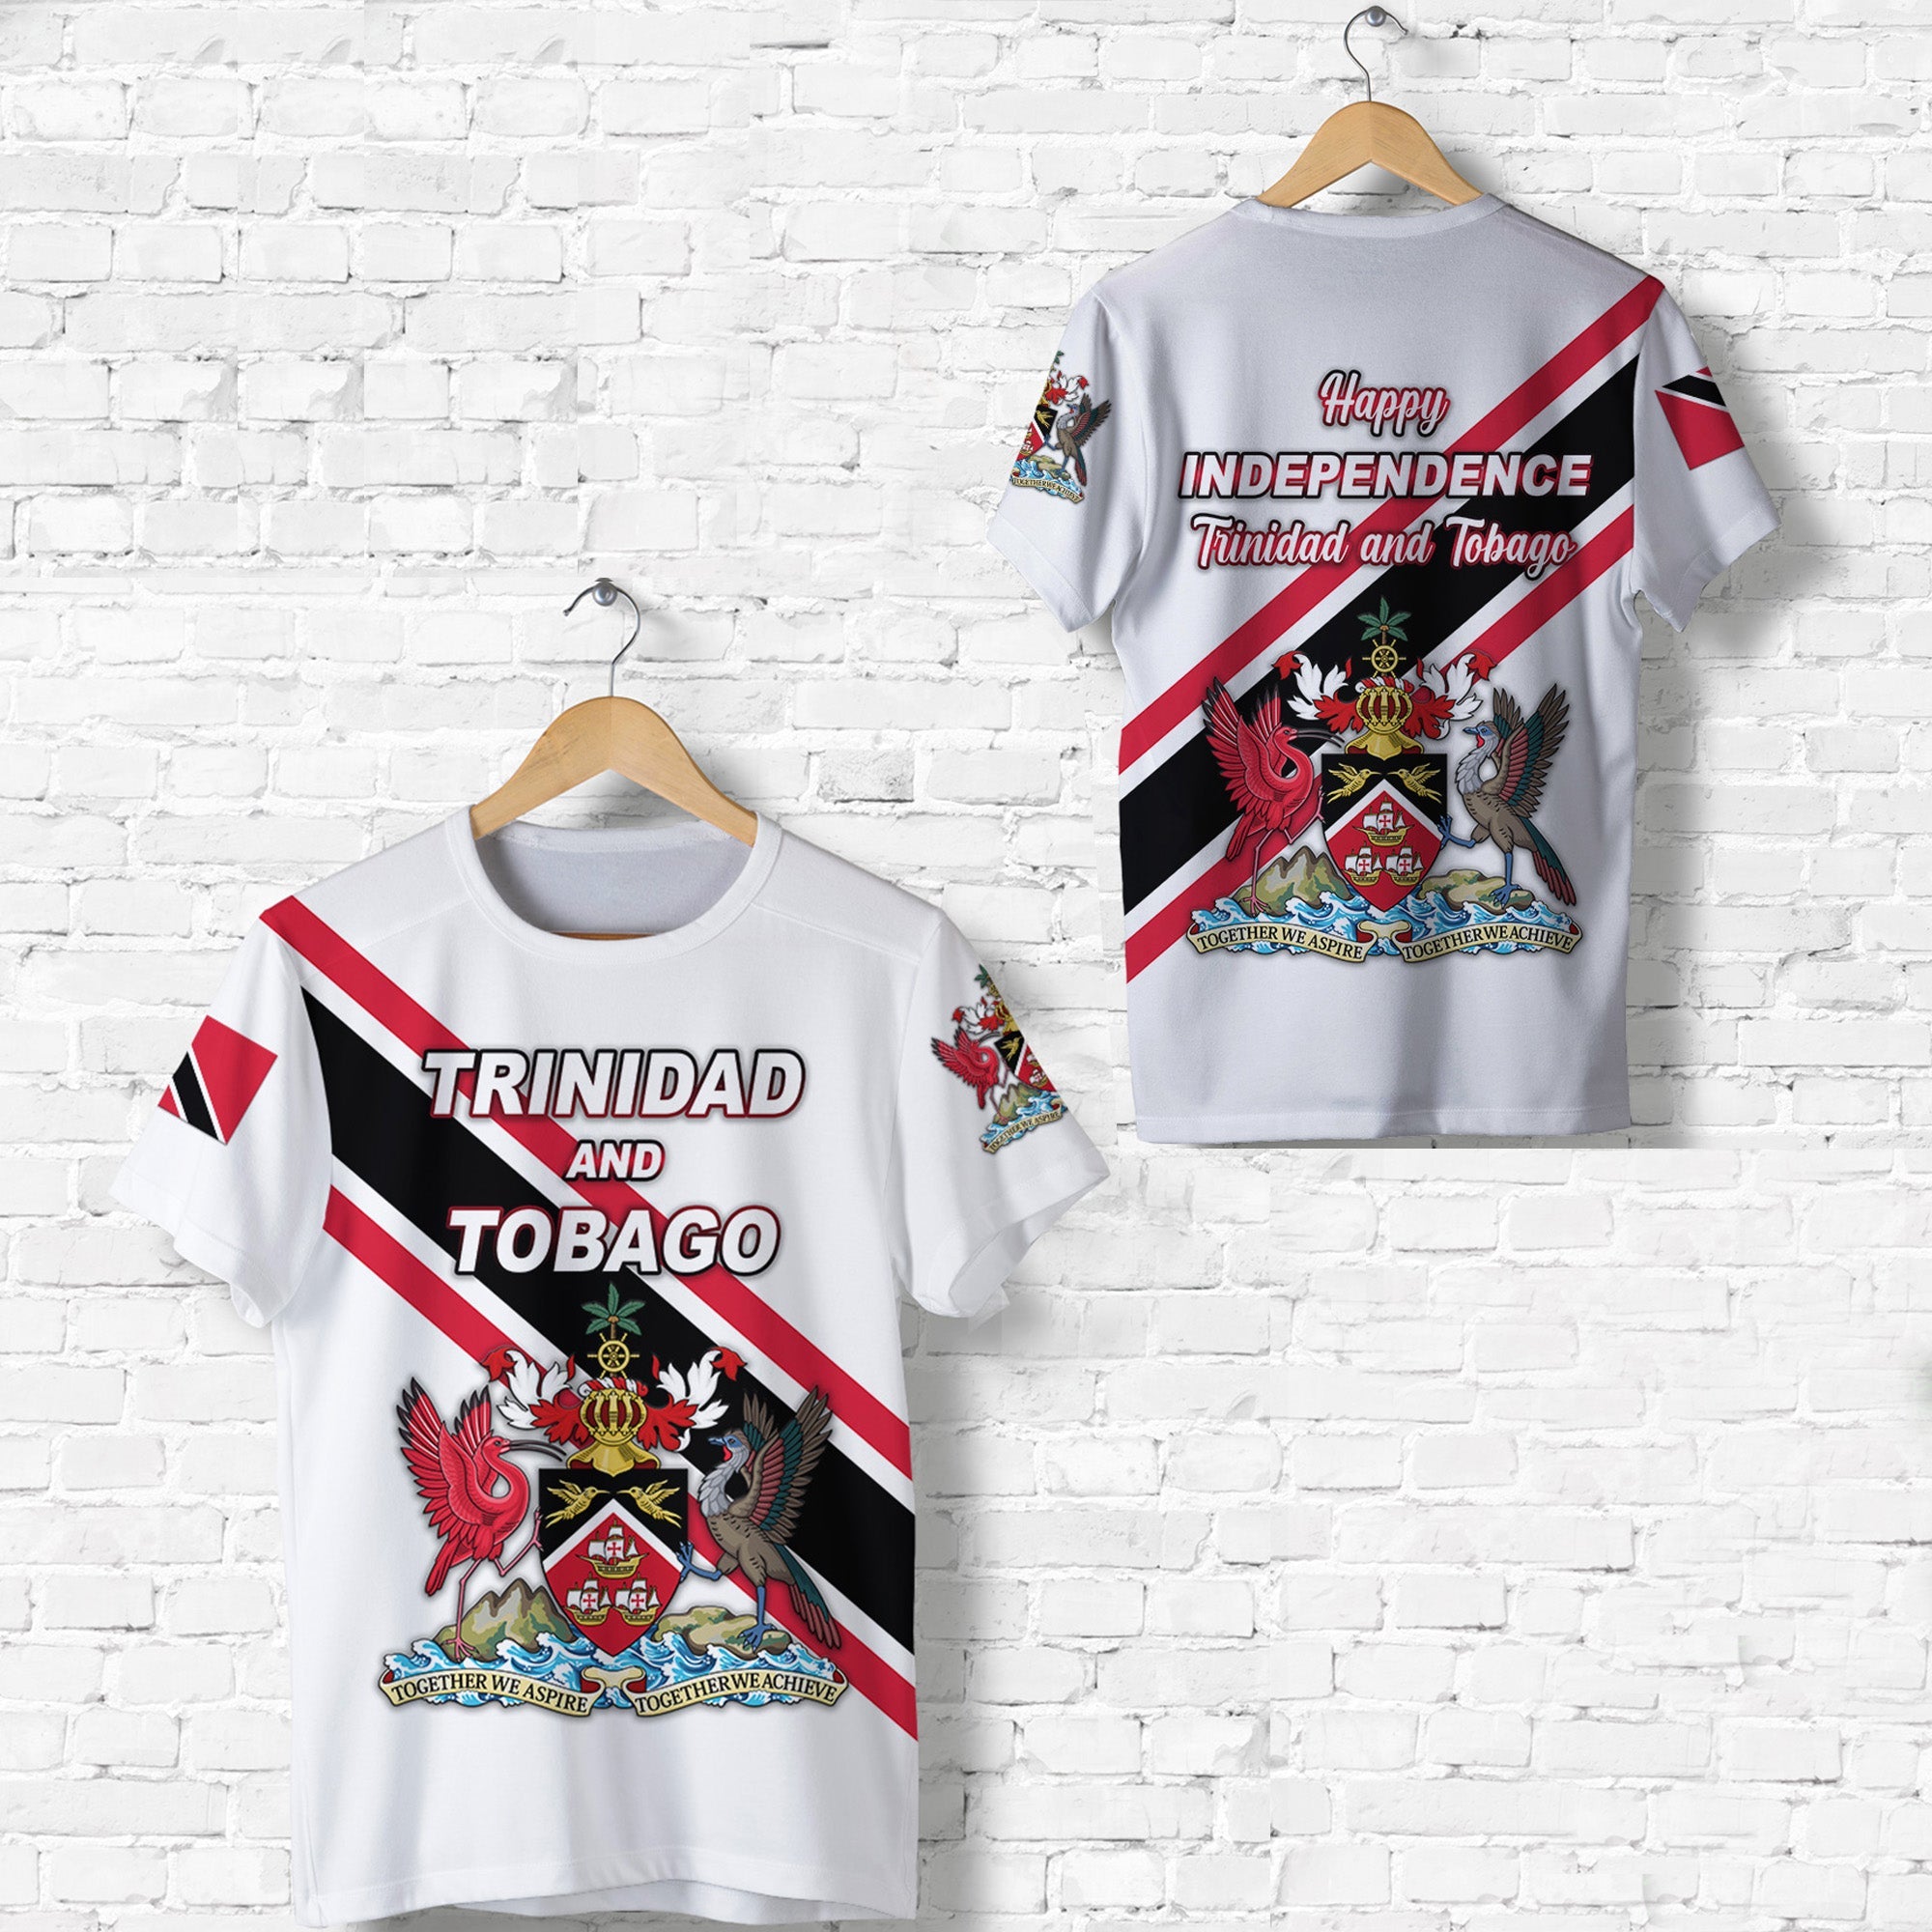 happy-trinidad-and-tobago-t-shirt-independence-day-white